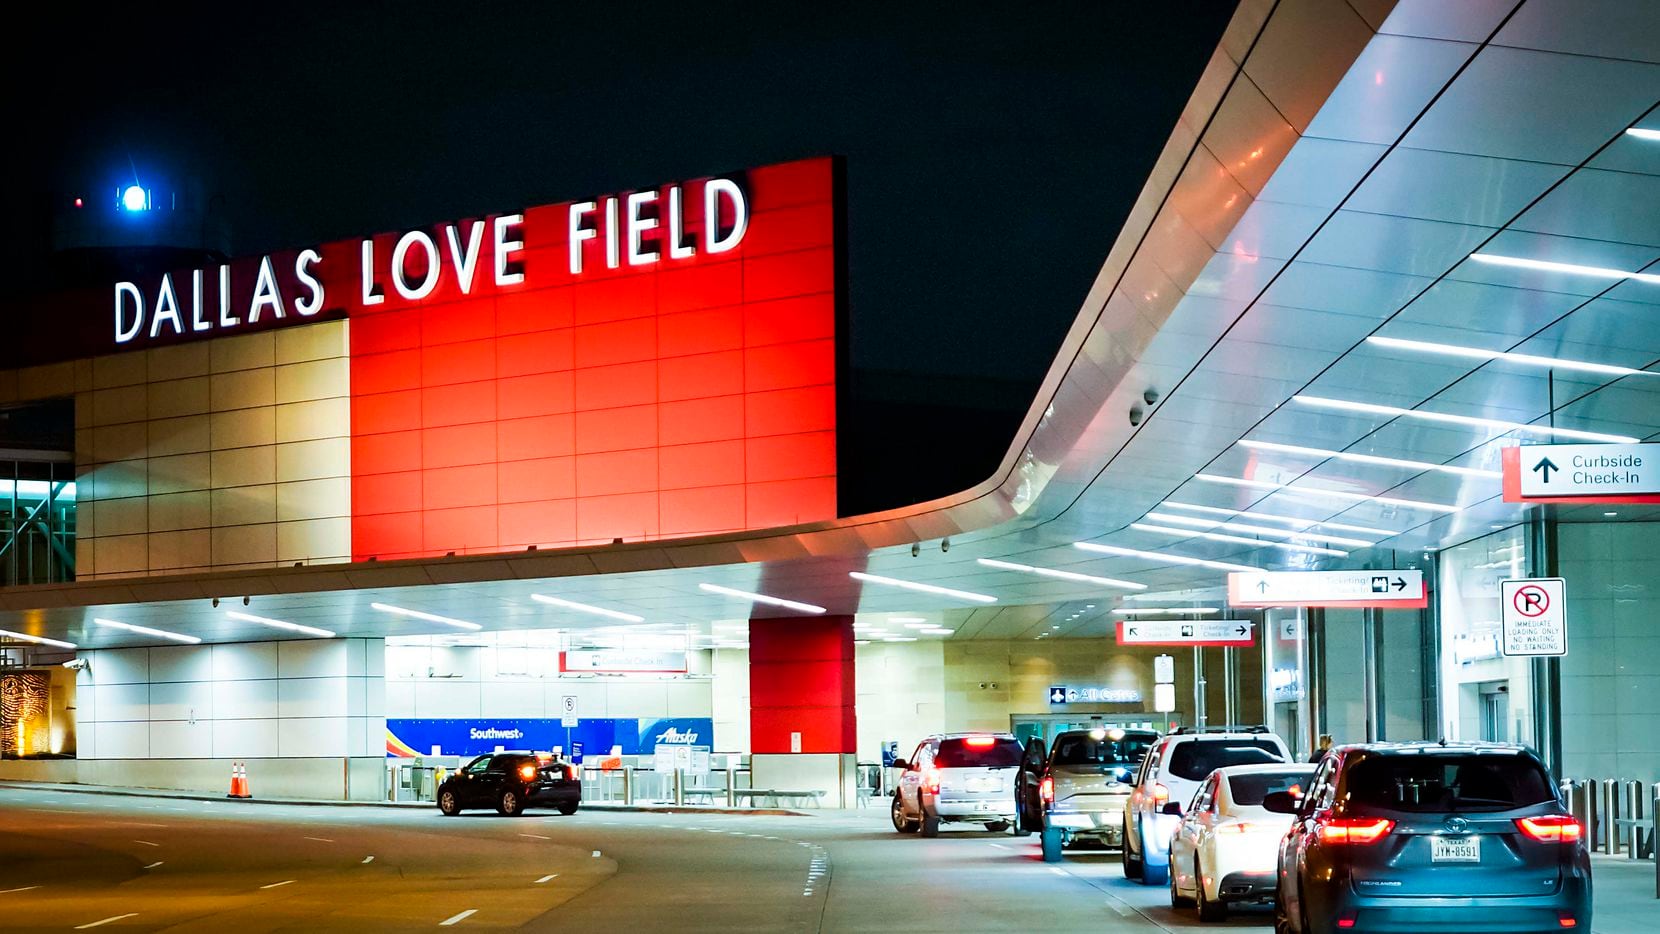 Cars pull up to the lightly trafficked departures curbside in front of Dallas Love Field airport on Friday, March 20, 2020, in Dallas.